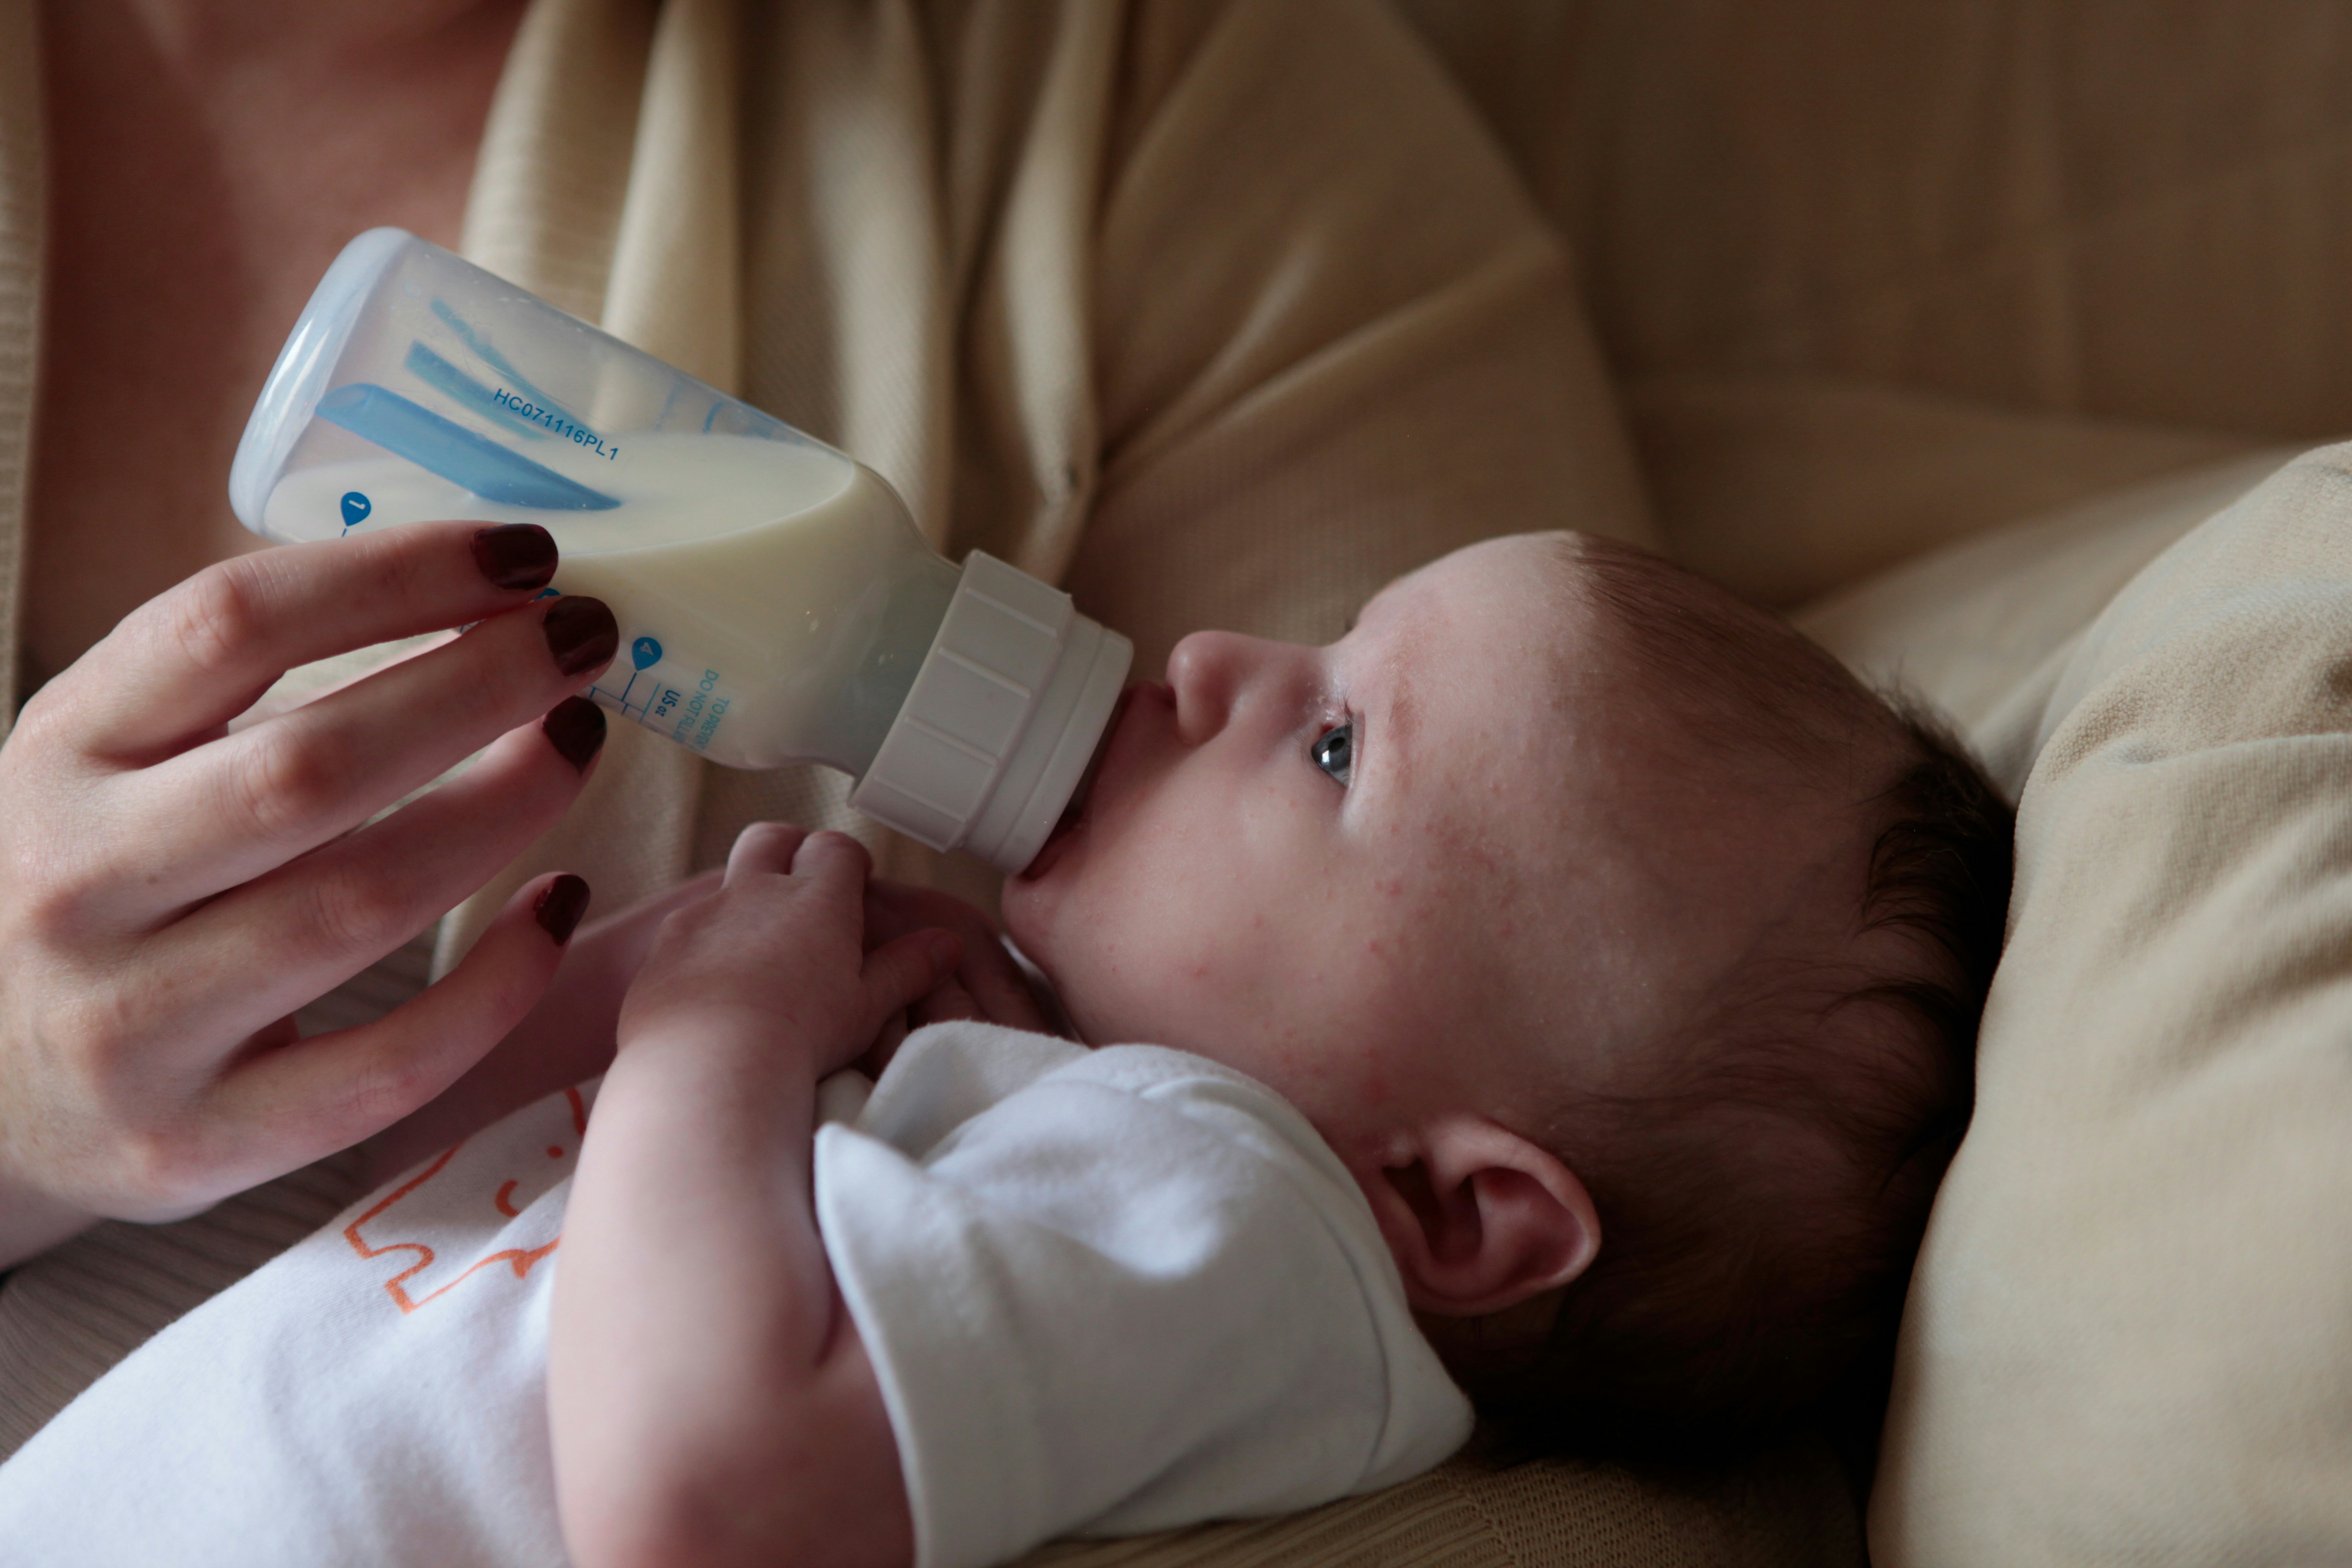 How to Bottle Feed a Baby: Essential Tips for First-Time Parents